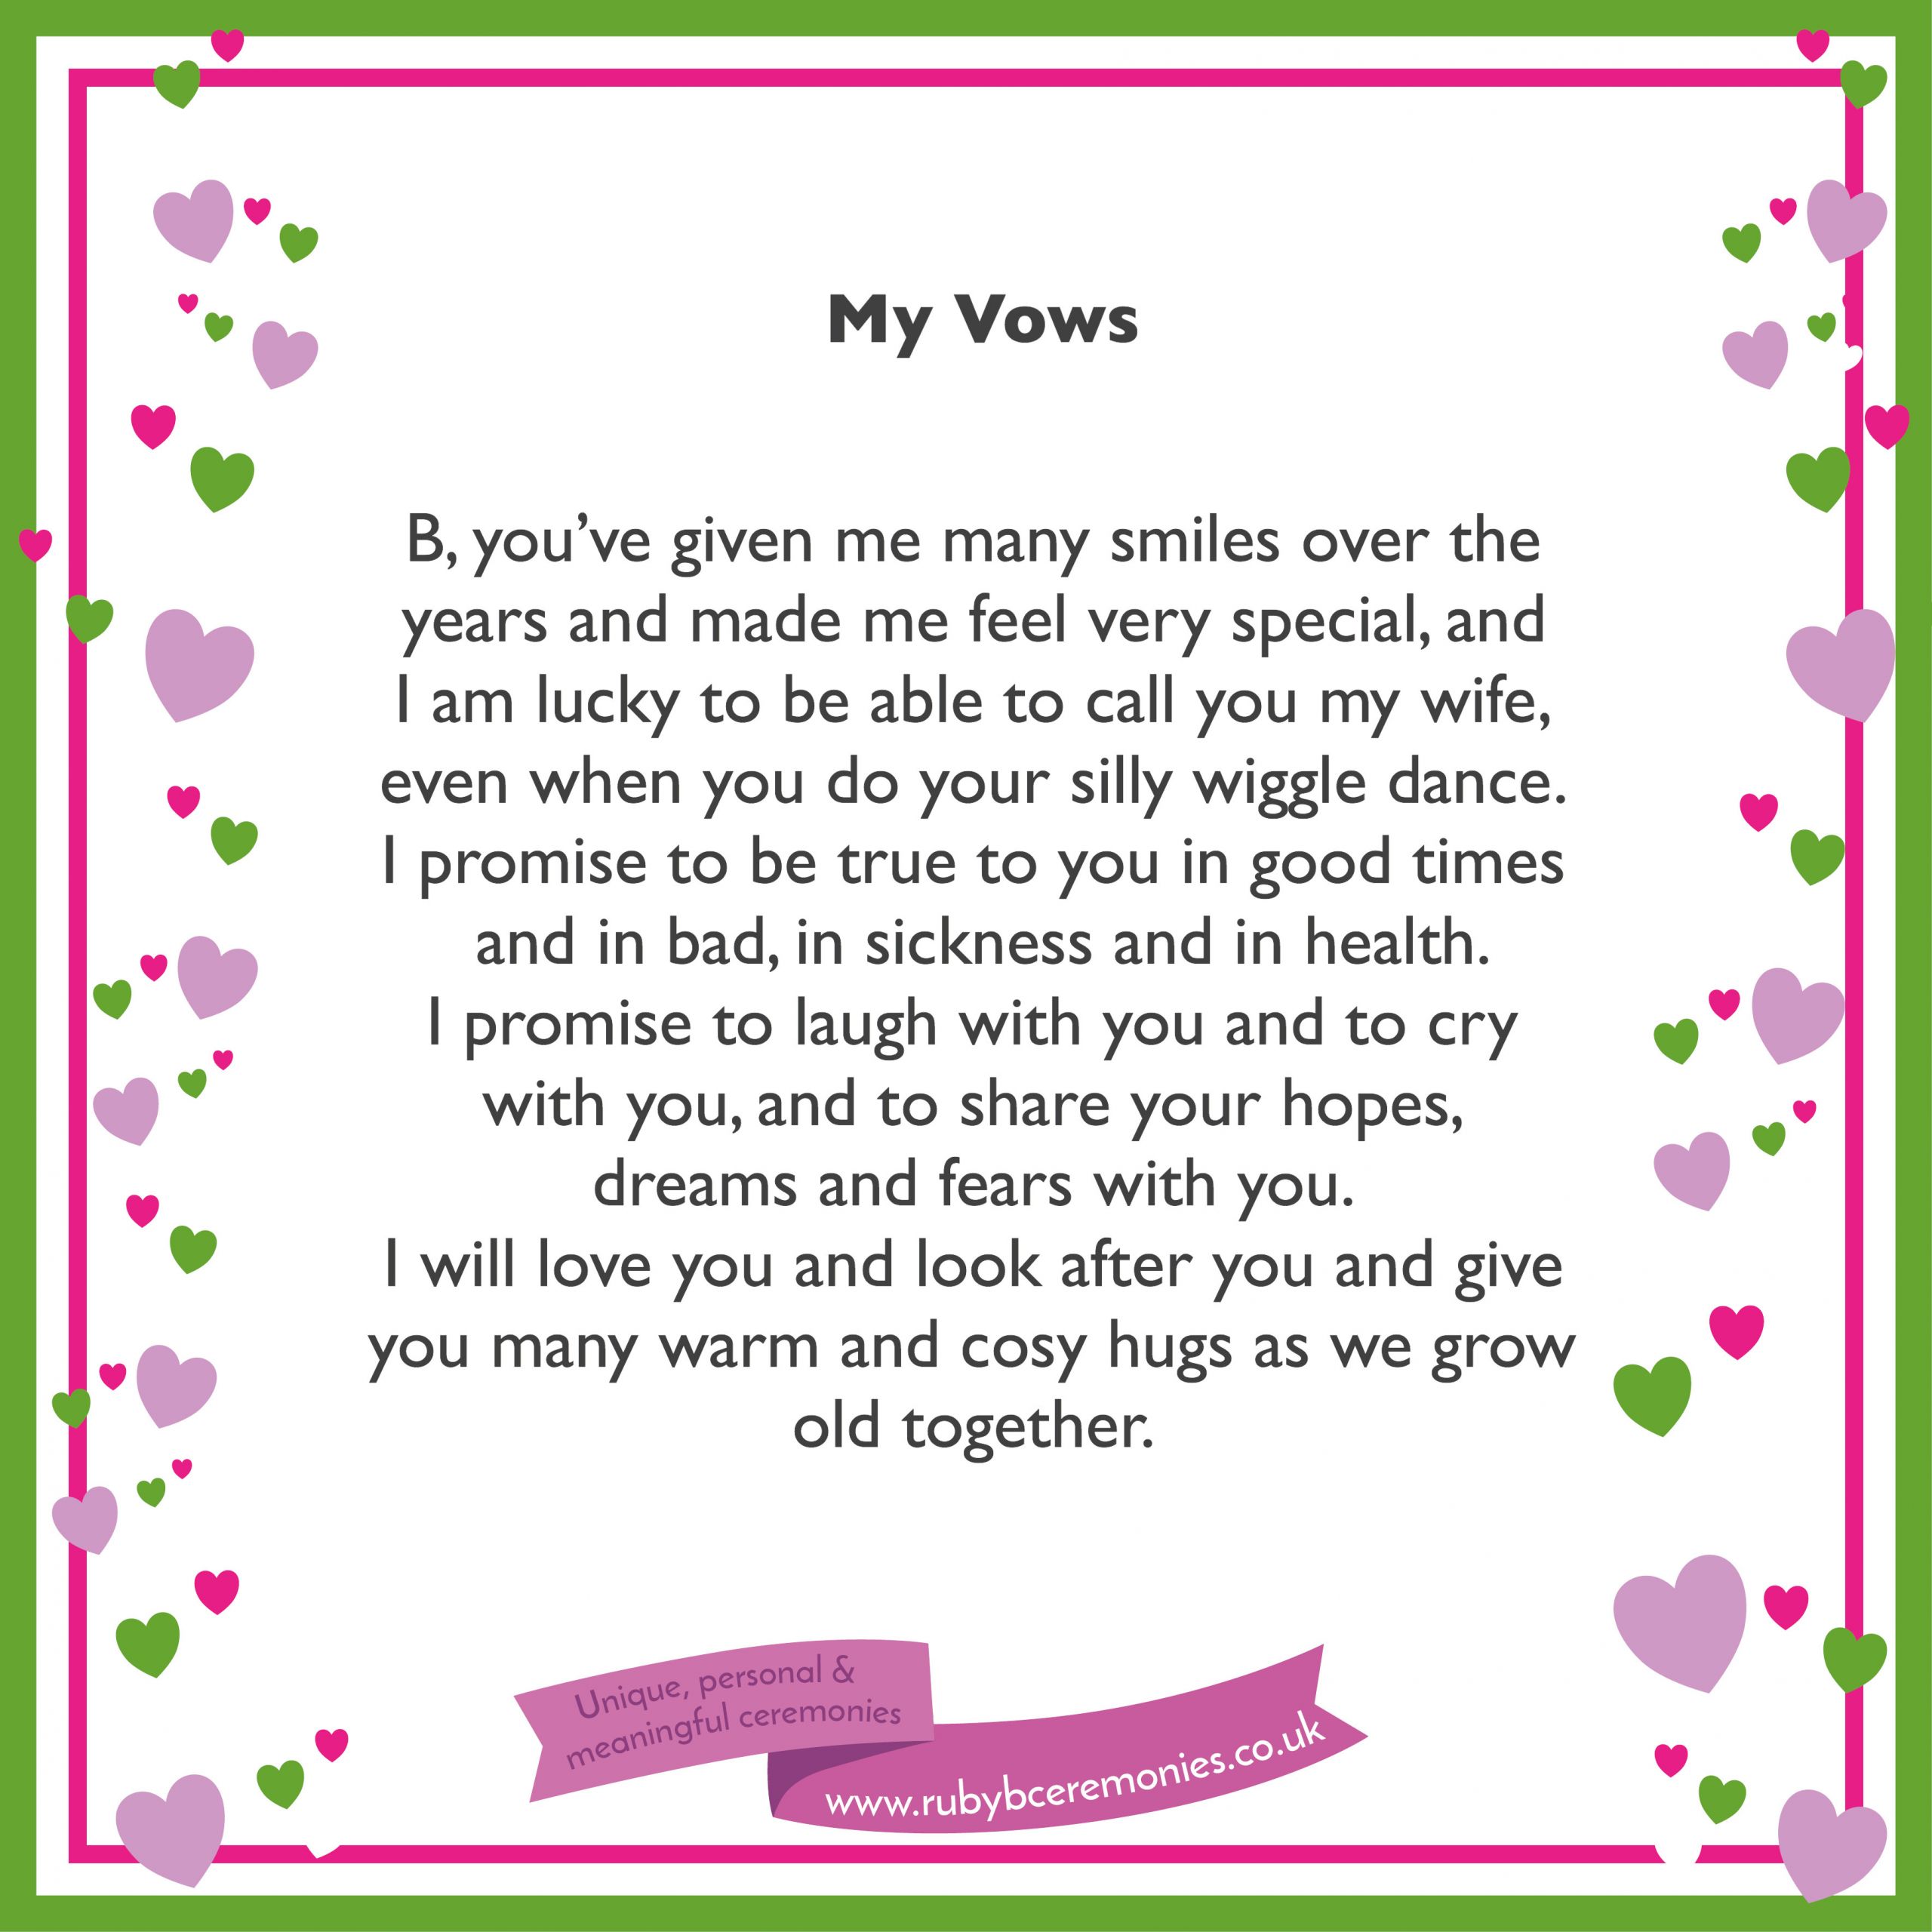 Unique Wedding Vows Examples
 A simple way to write your wedding vows Ruby B